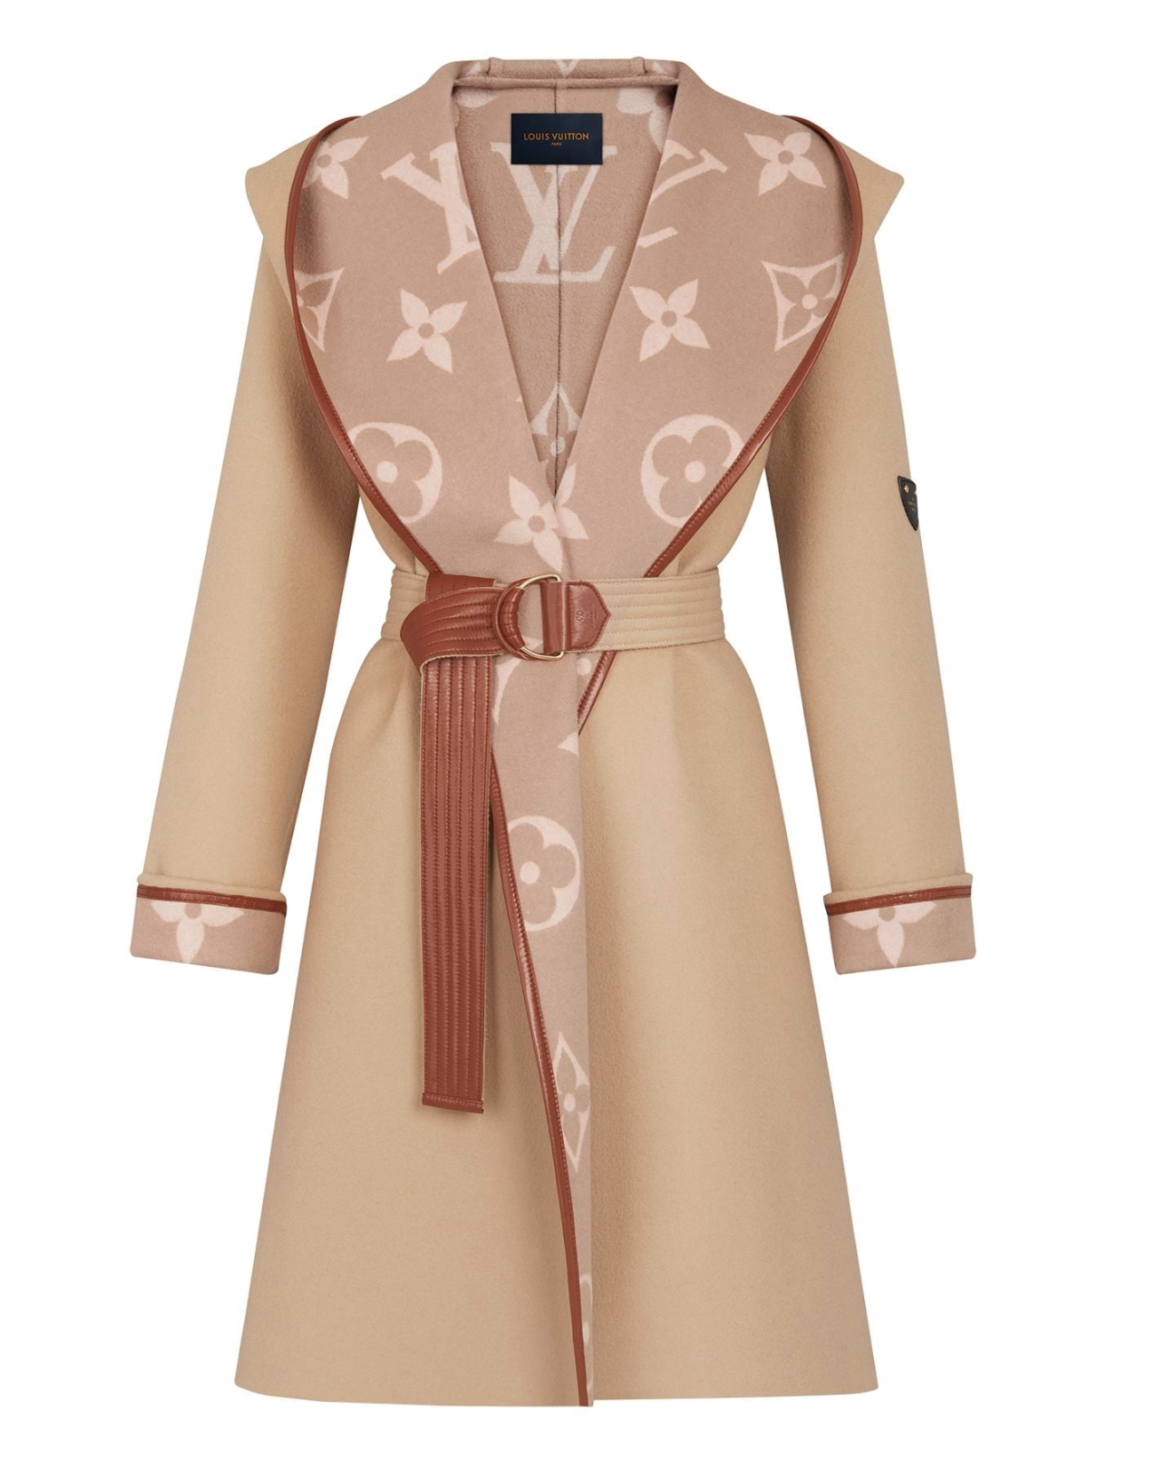 Bomb_Product_of_the_day_Louis_Vuitton_tan_wrap_coat_2